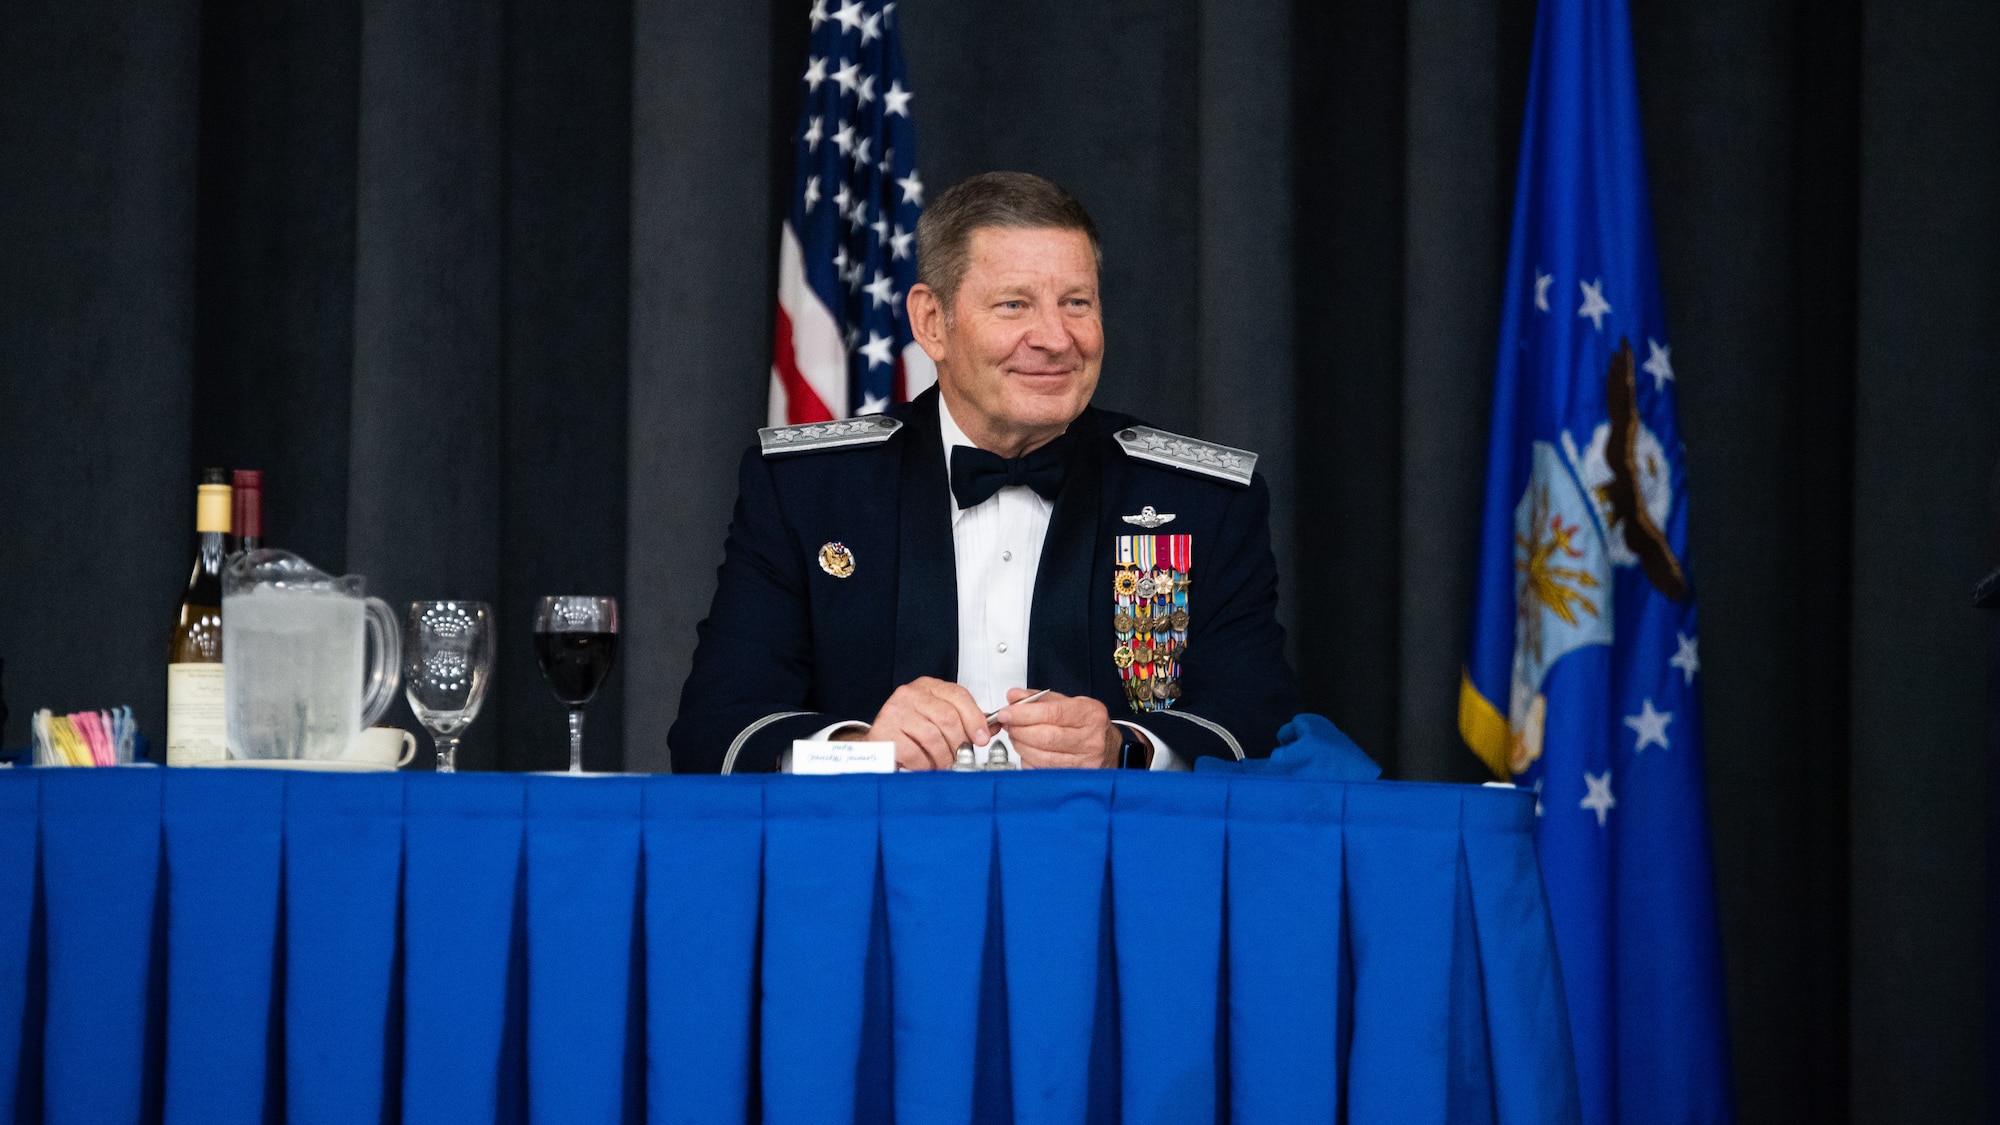 Retired Gen. Robin Rand, former Air Force Global Strike Command commander, sits at the head table during an Order of the Sword ceremony at Barksdale Air Force Base, Louisiana, April 23, 2021. The Order of the Sword is a rare honor bestowed on a senior officer or civilian by the enlisted corps of a command. (U.S. Air Force photo by Airman 1st Class Jacob B. Wrightsman)